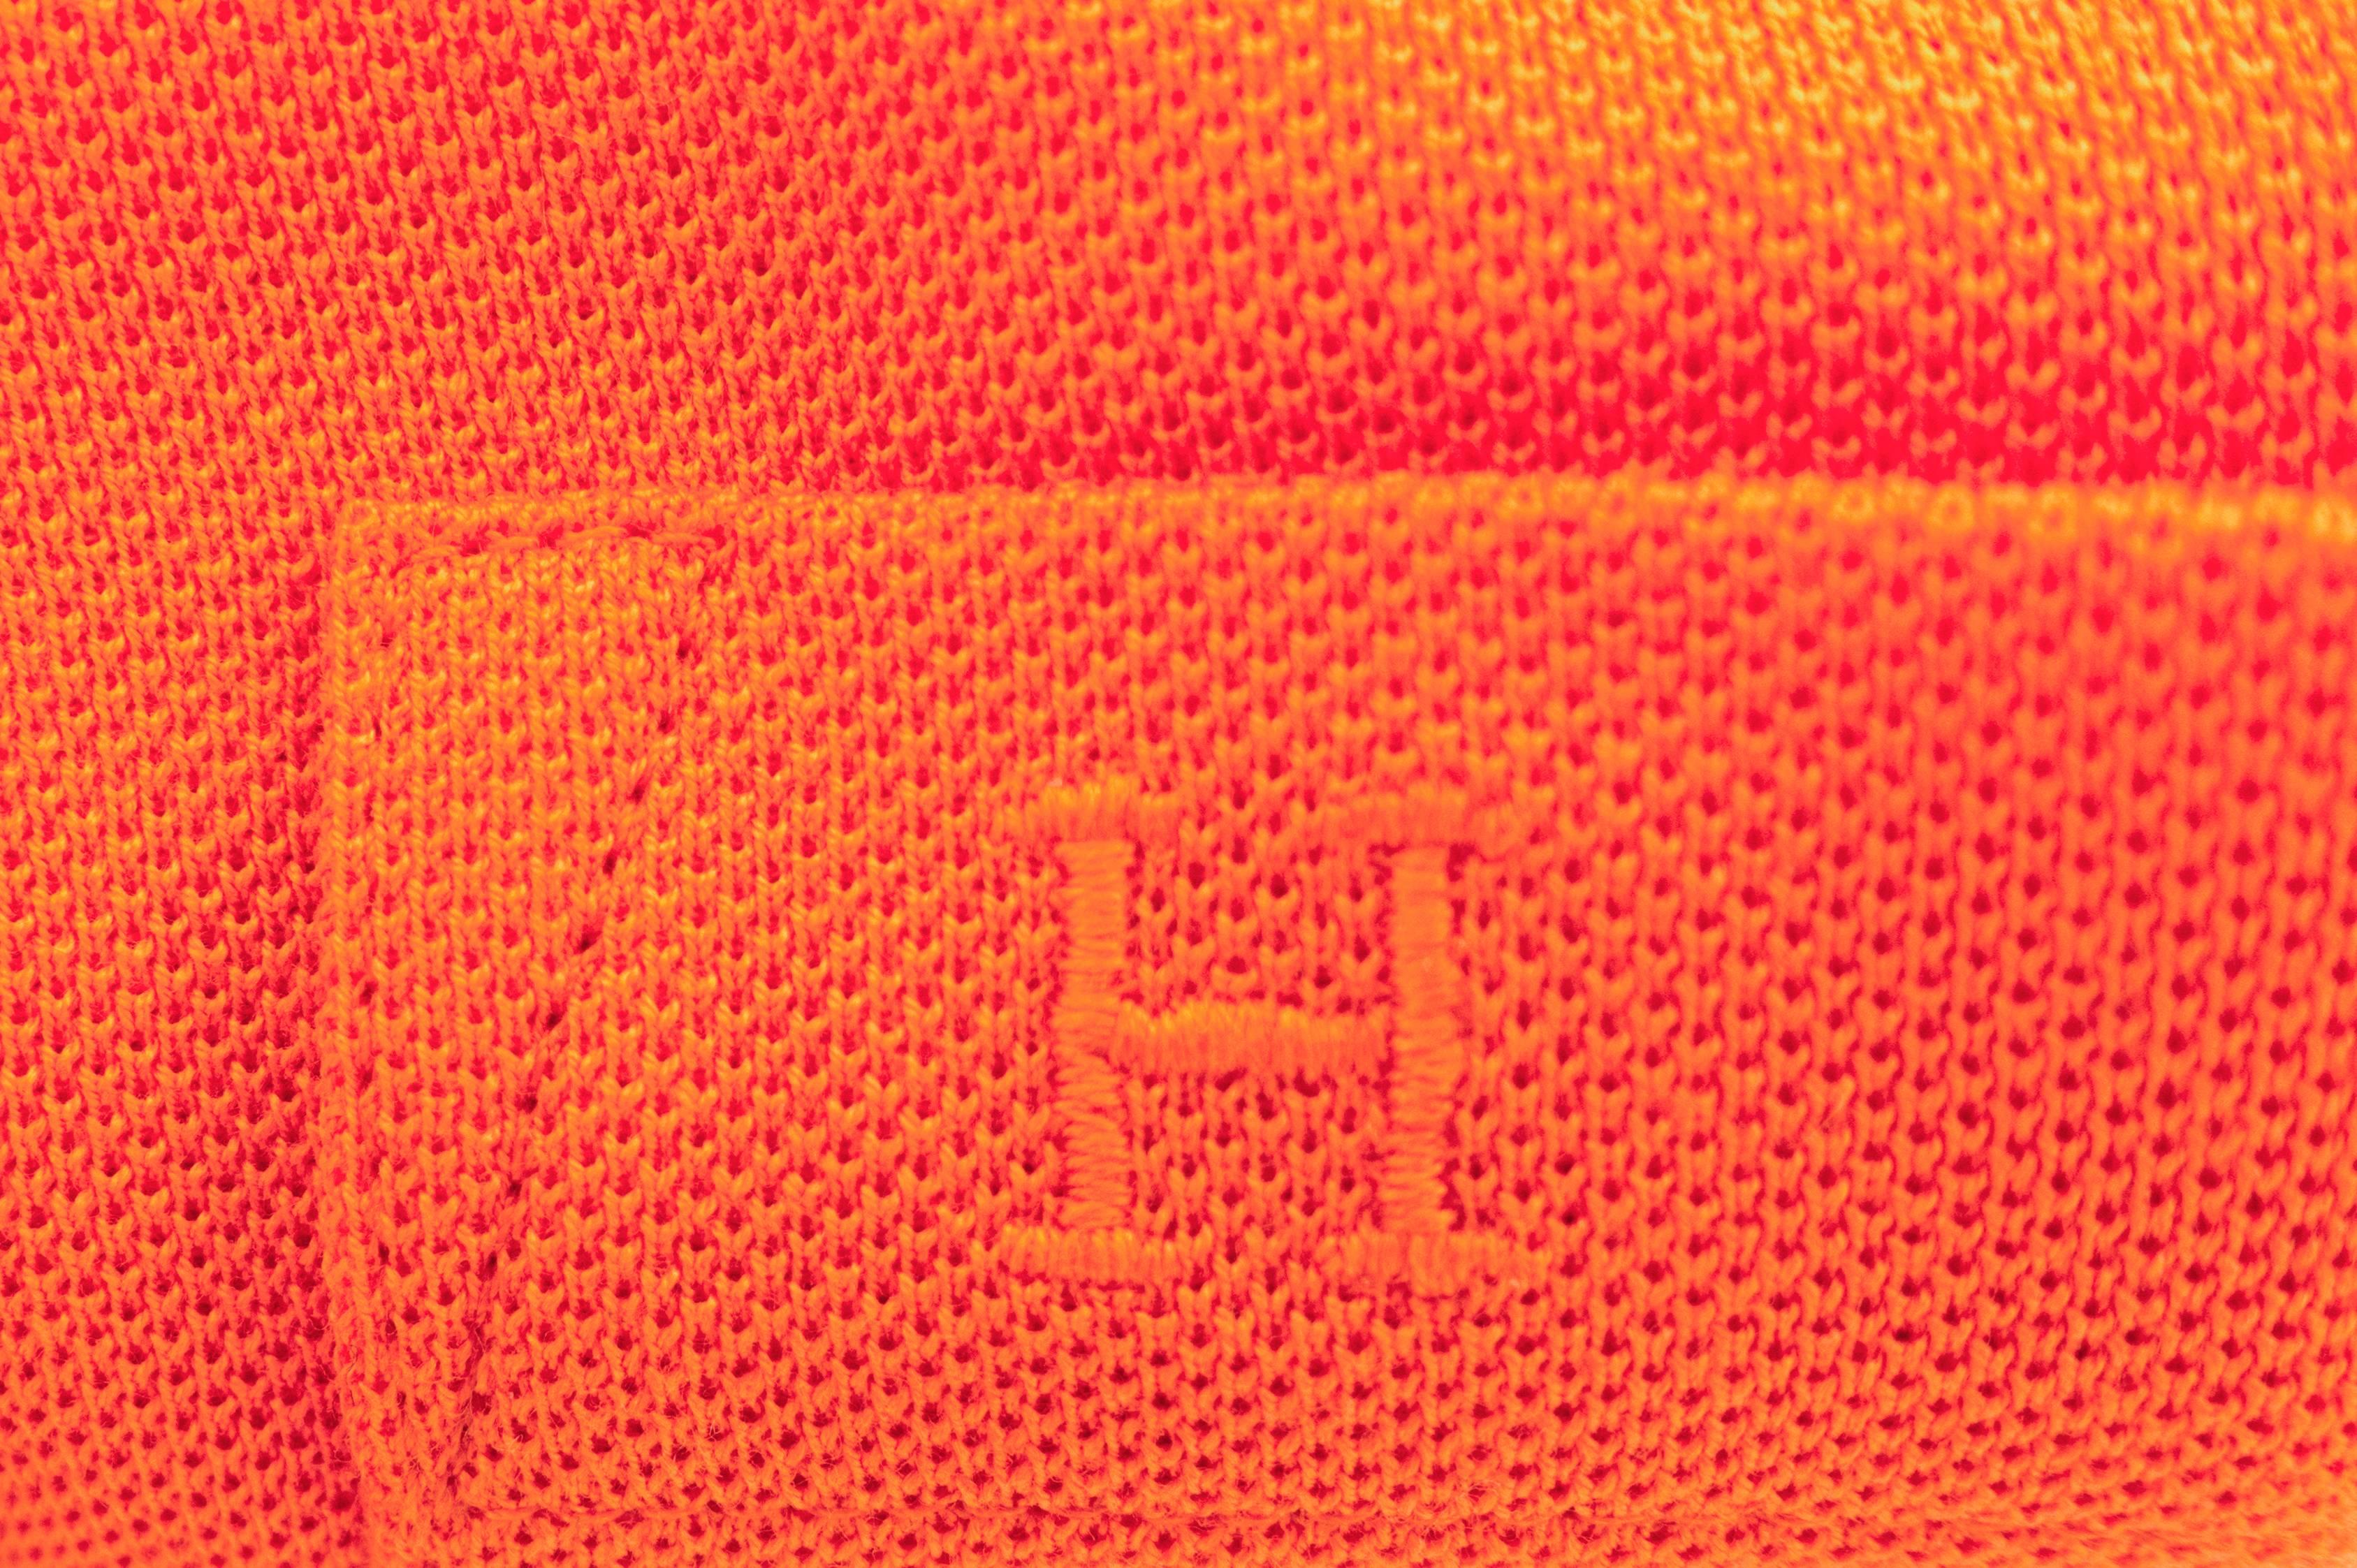 Hermes Orange Men's Polo Short Sleeve Hot Pink Cotton Large Spring! 
Store fresh. Pristine condition. Size Large.  
Below retail around $495 including tax where we are 
This is the Hermes house orange that is so iconic!
Hermes polo shirts are